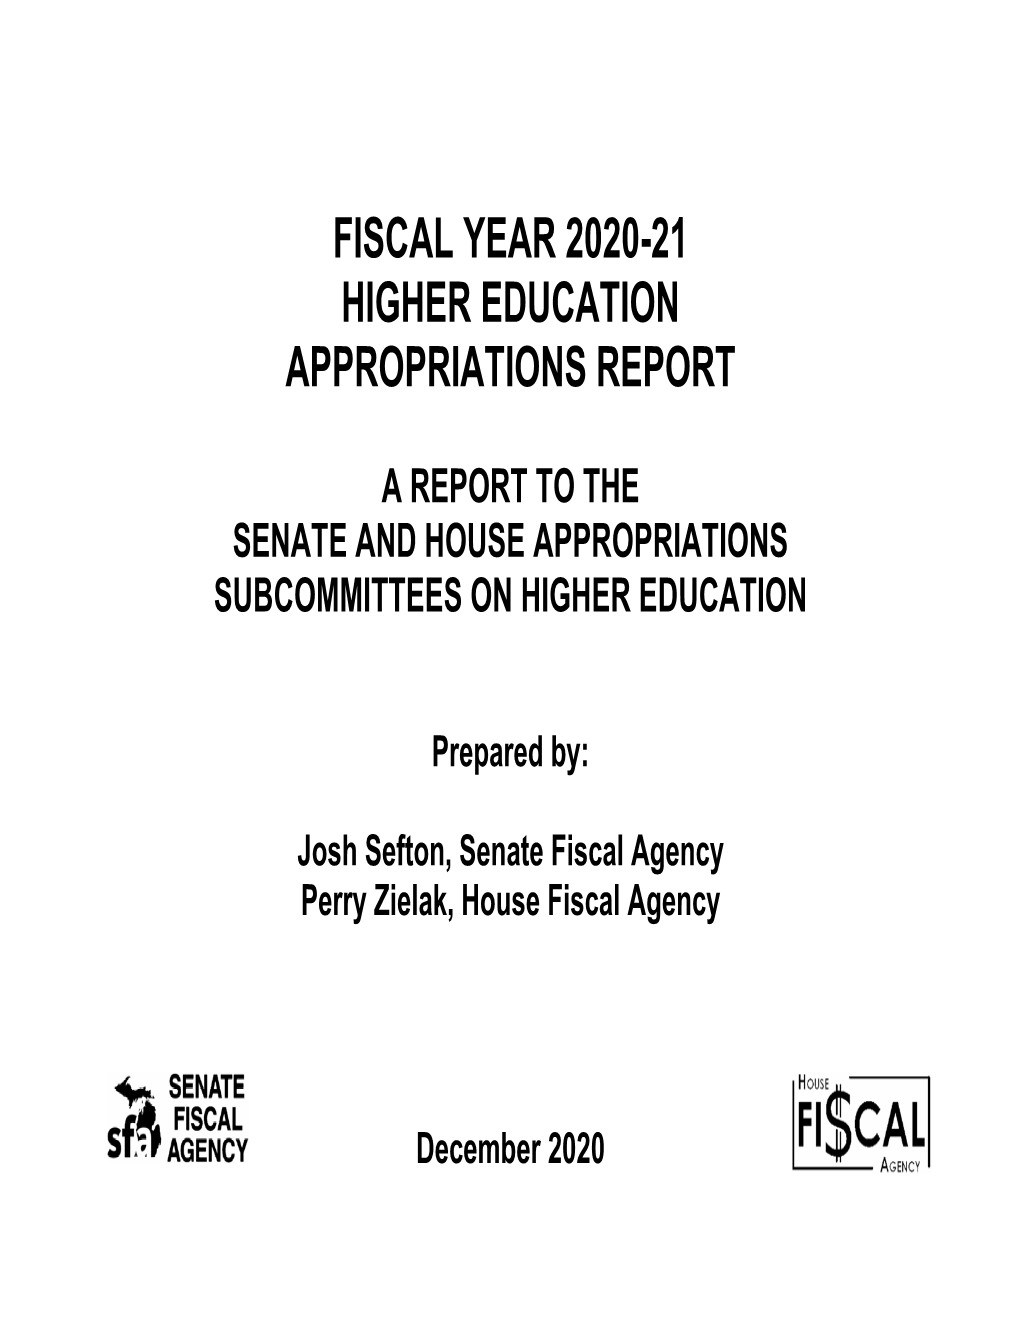 Fiscal Year 2020-21 Higher Education Appropriations Report